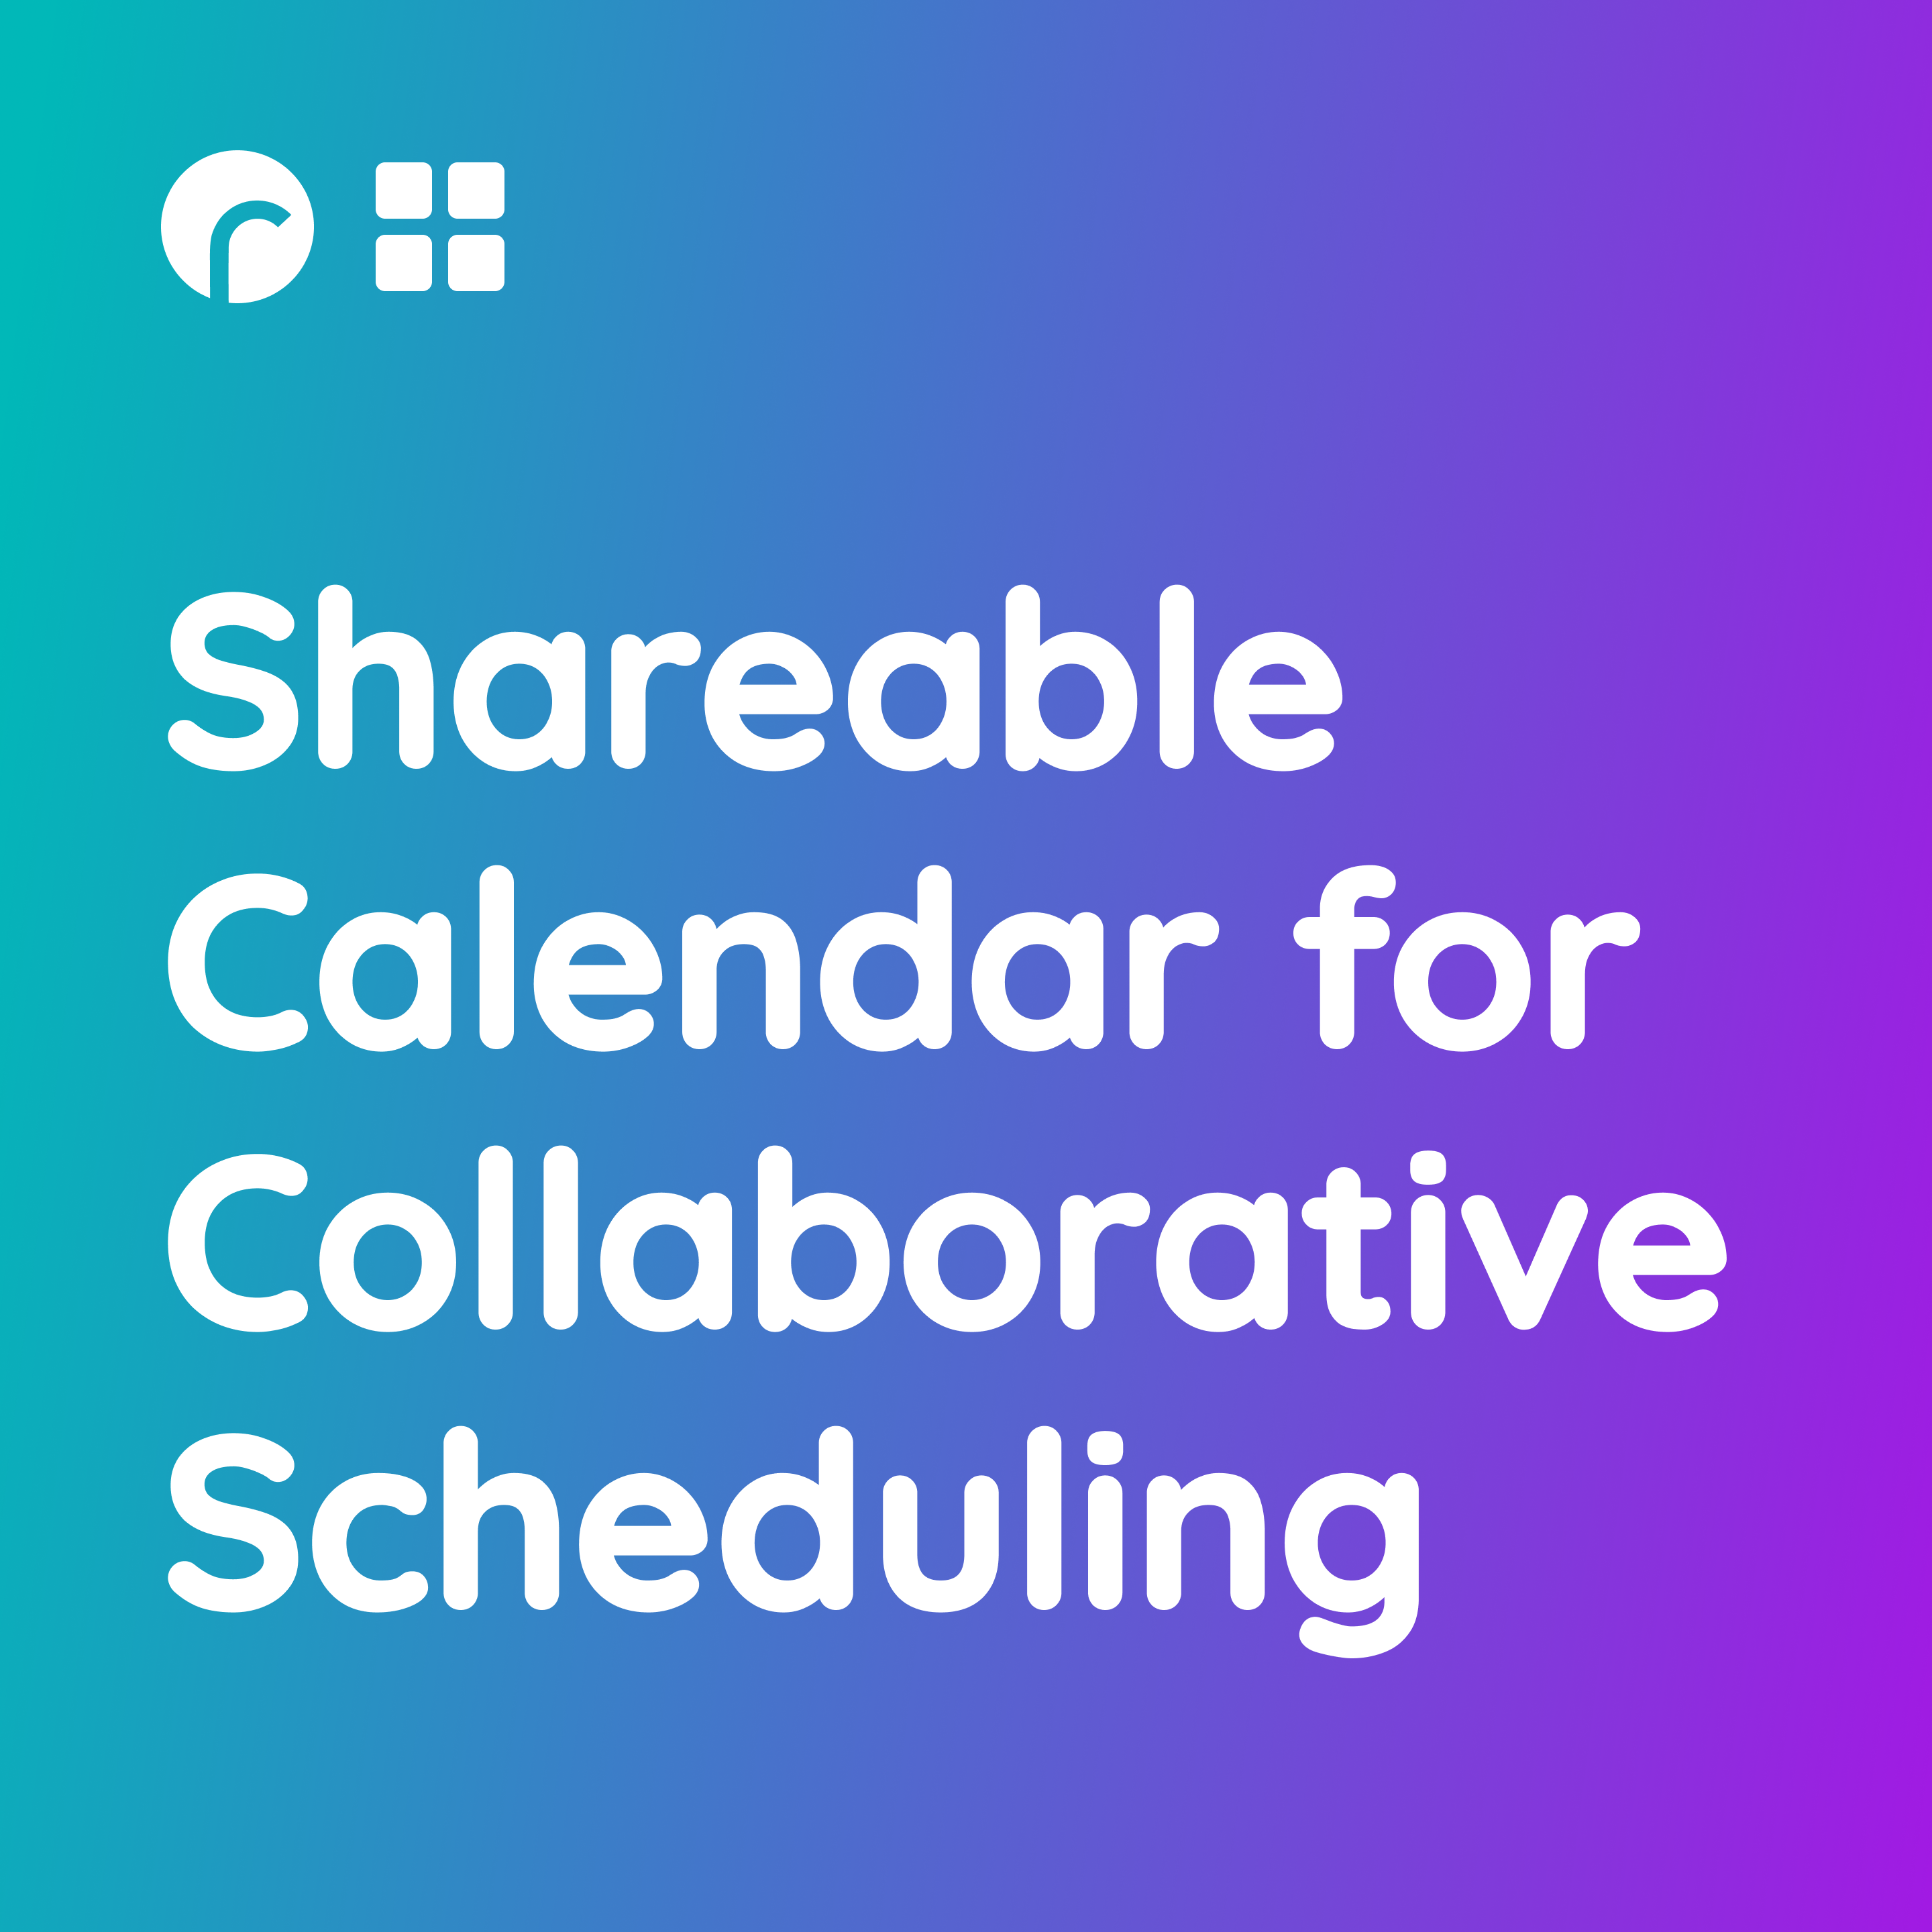 We've Launched a Shareable Calendar for Collaborative Scheduling!